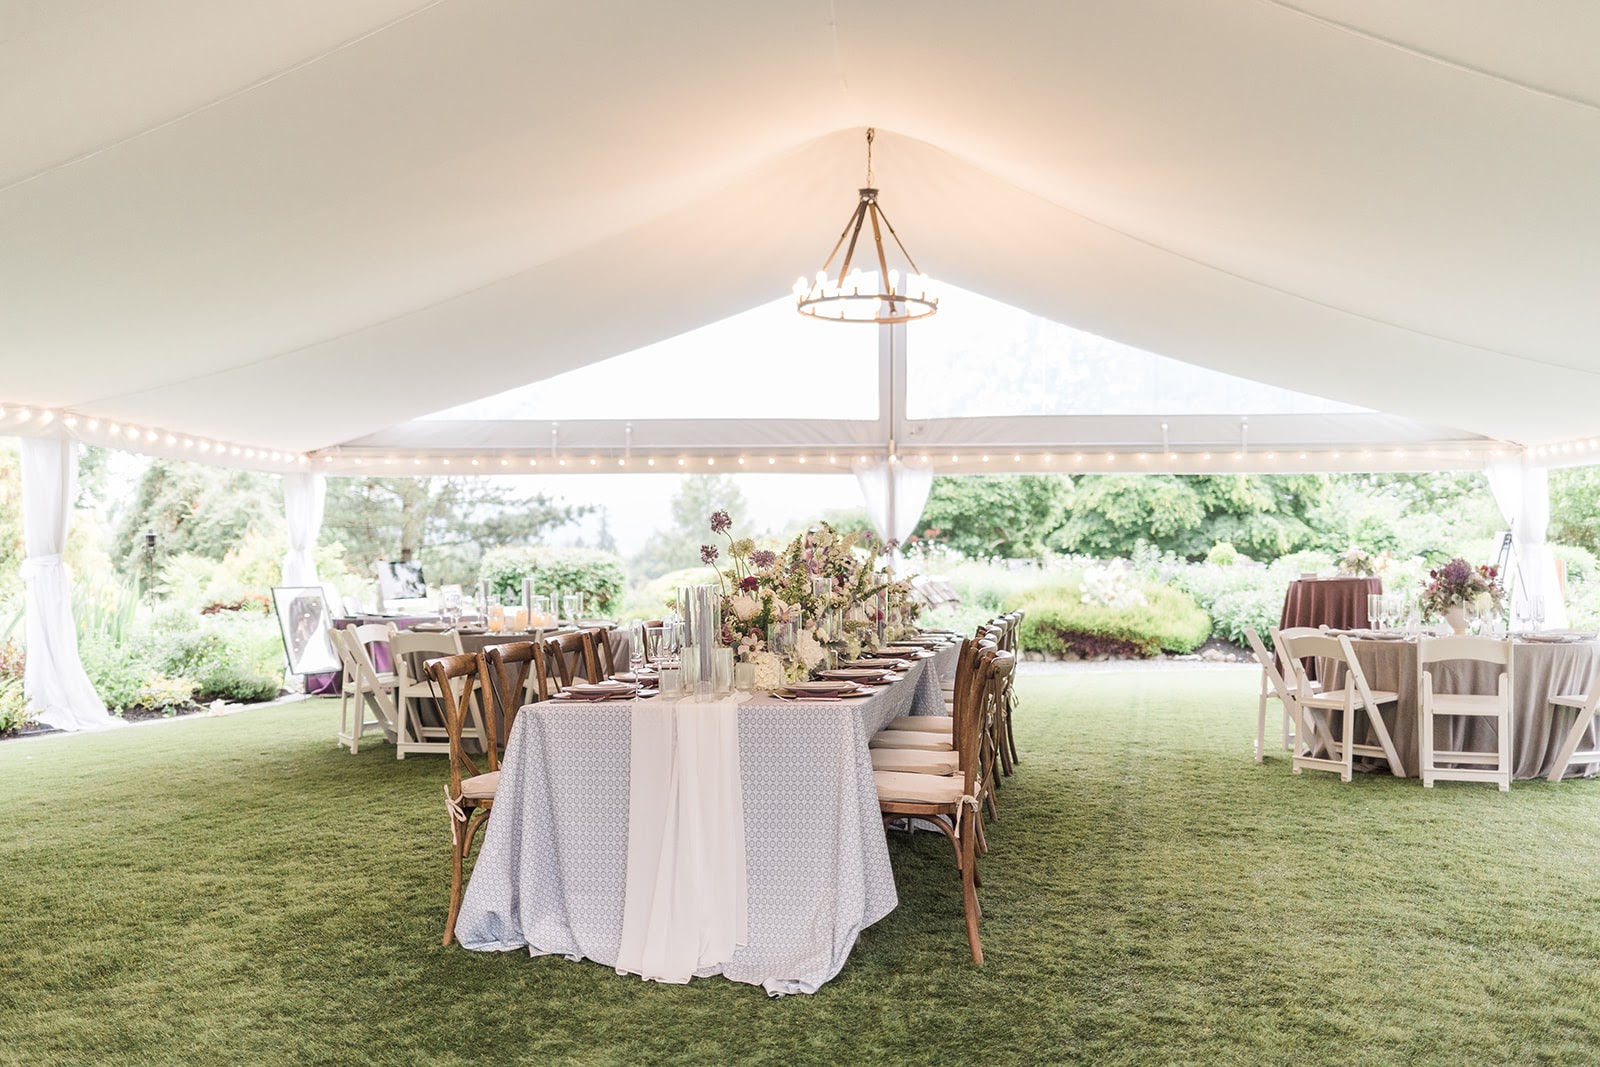 The 2021 Event Tents Guide Every Planner Needs to Read